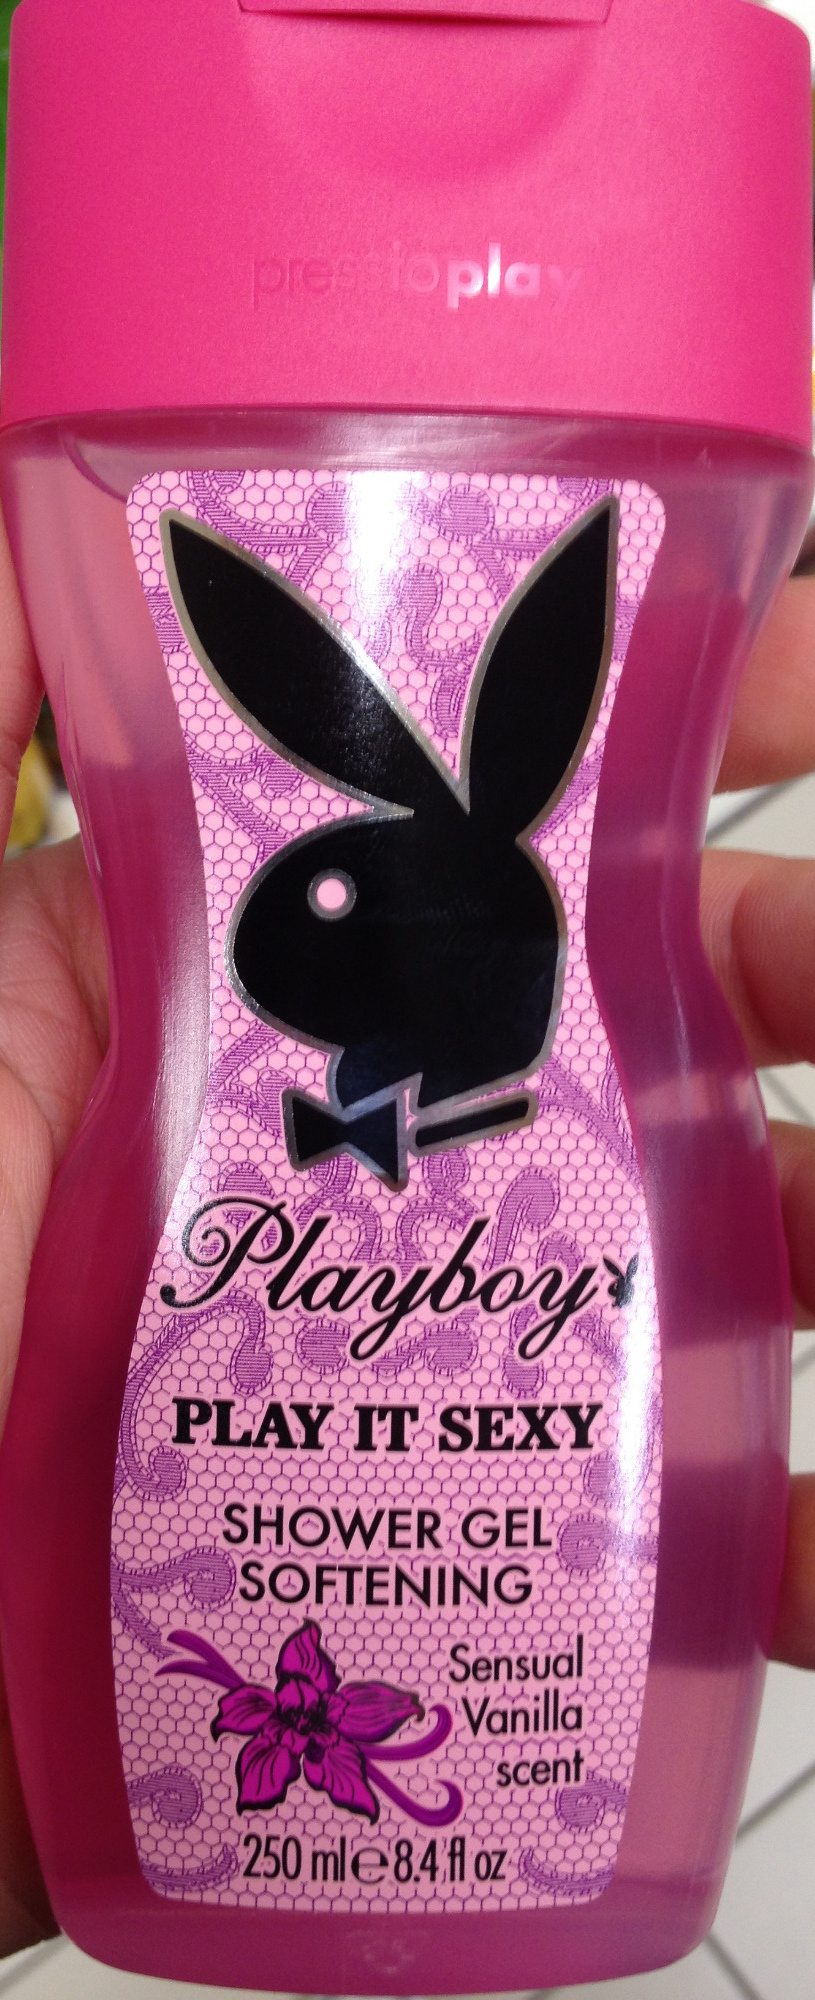 Play it sexy shower gel softening sensual vanilla scent - Product - fr